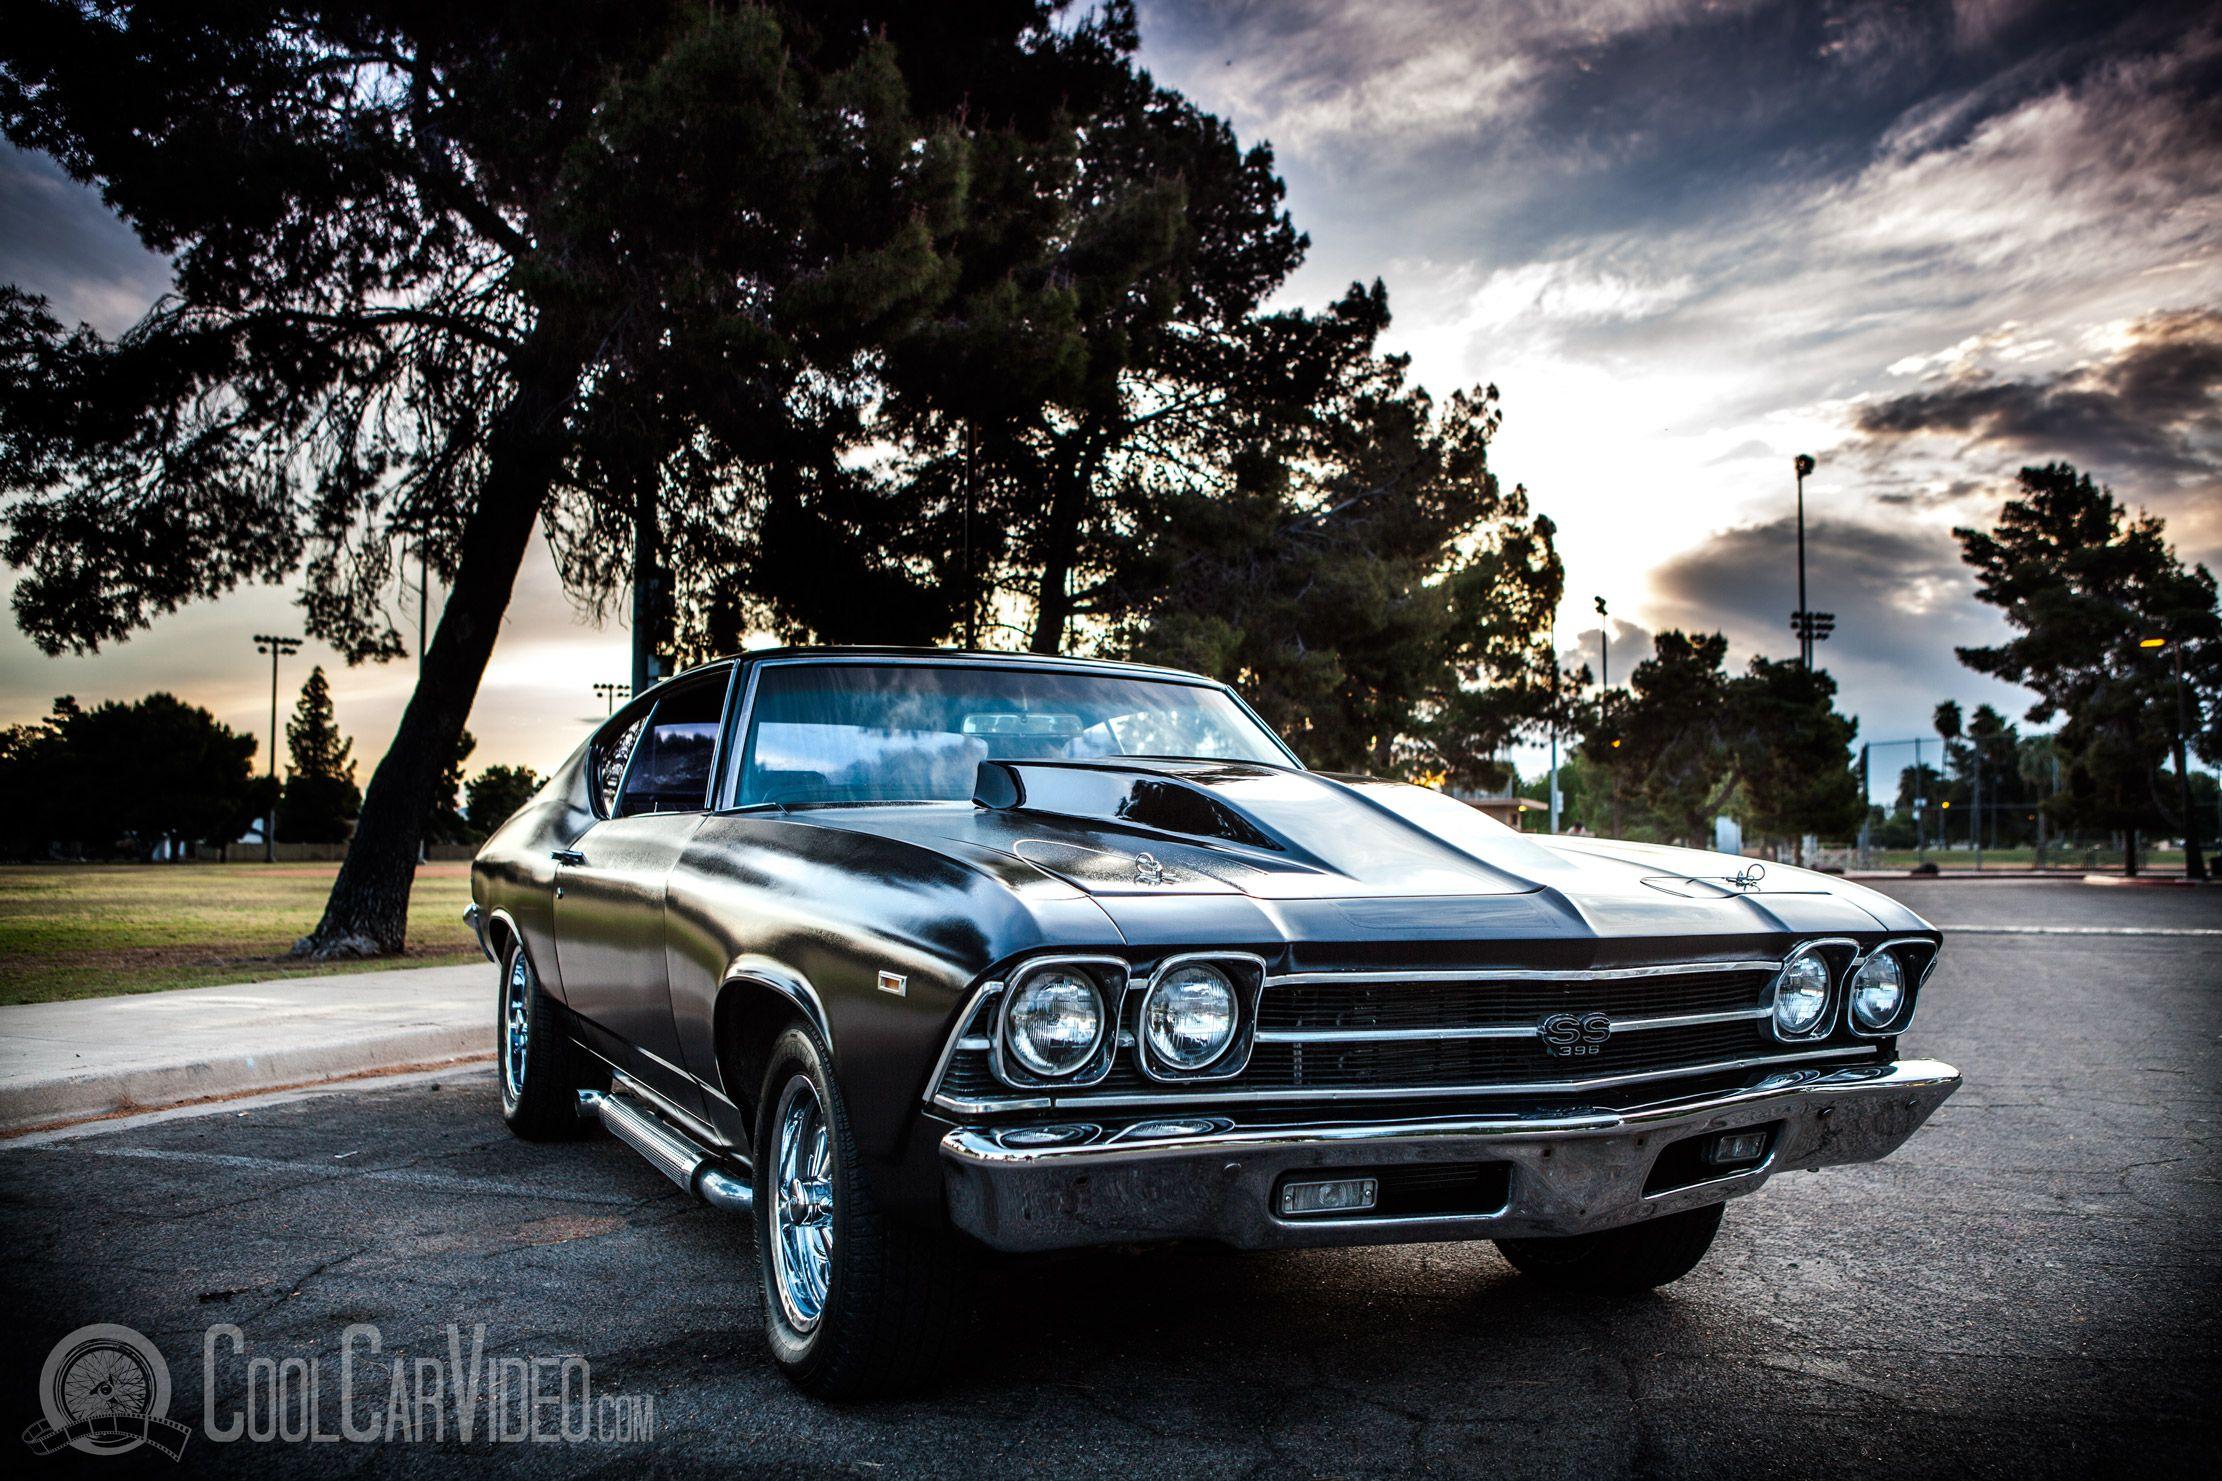 Chevelle SS with 454